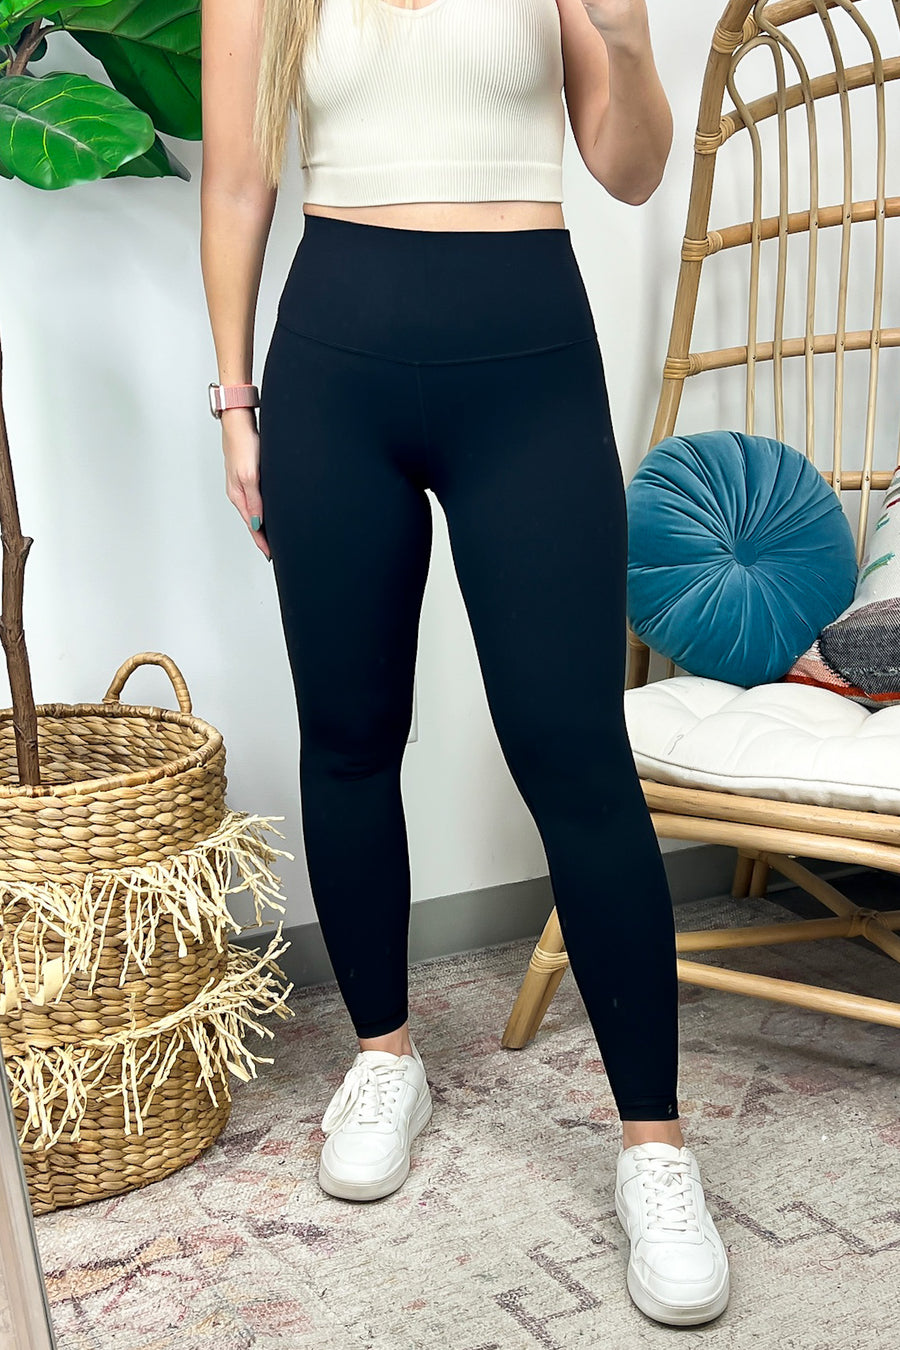 Black / 25" / S Silvah High Waist Active Leggings - BACK IN STOCK - Madison and Mallory